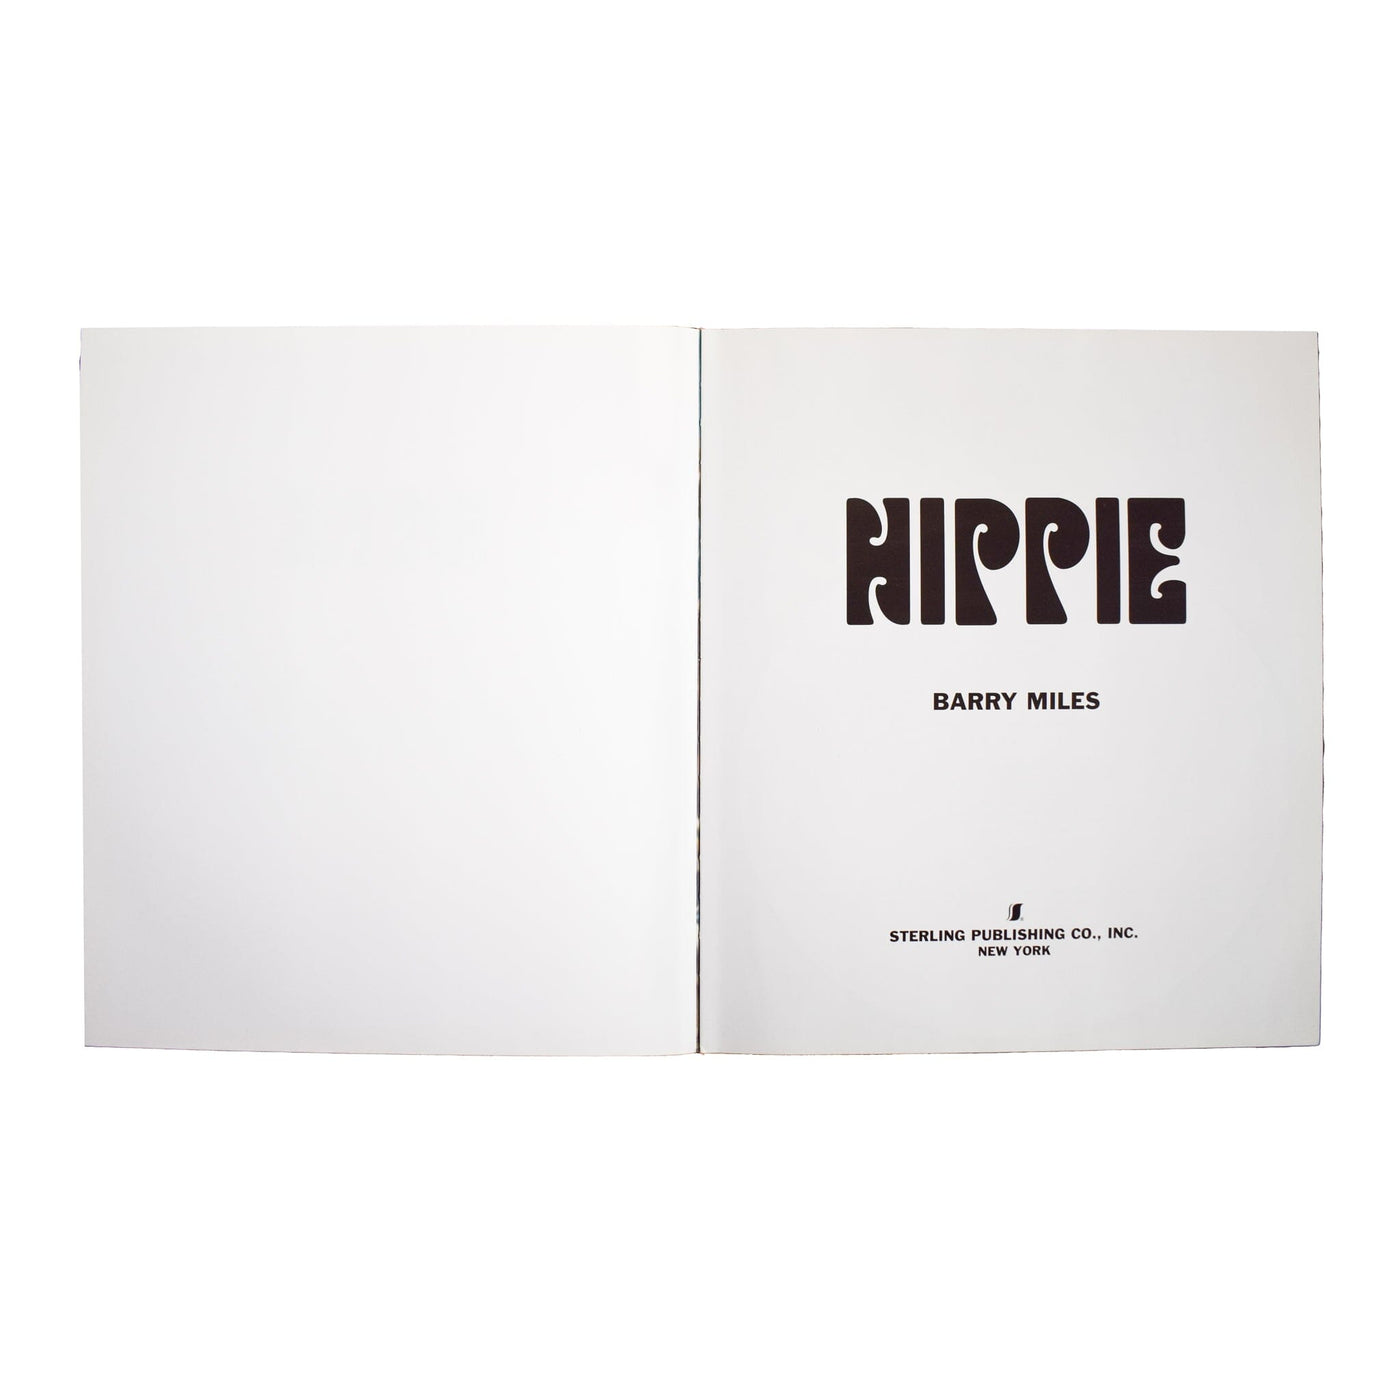 Hippie - Gilded Coffee Table Book Books the bms 